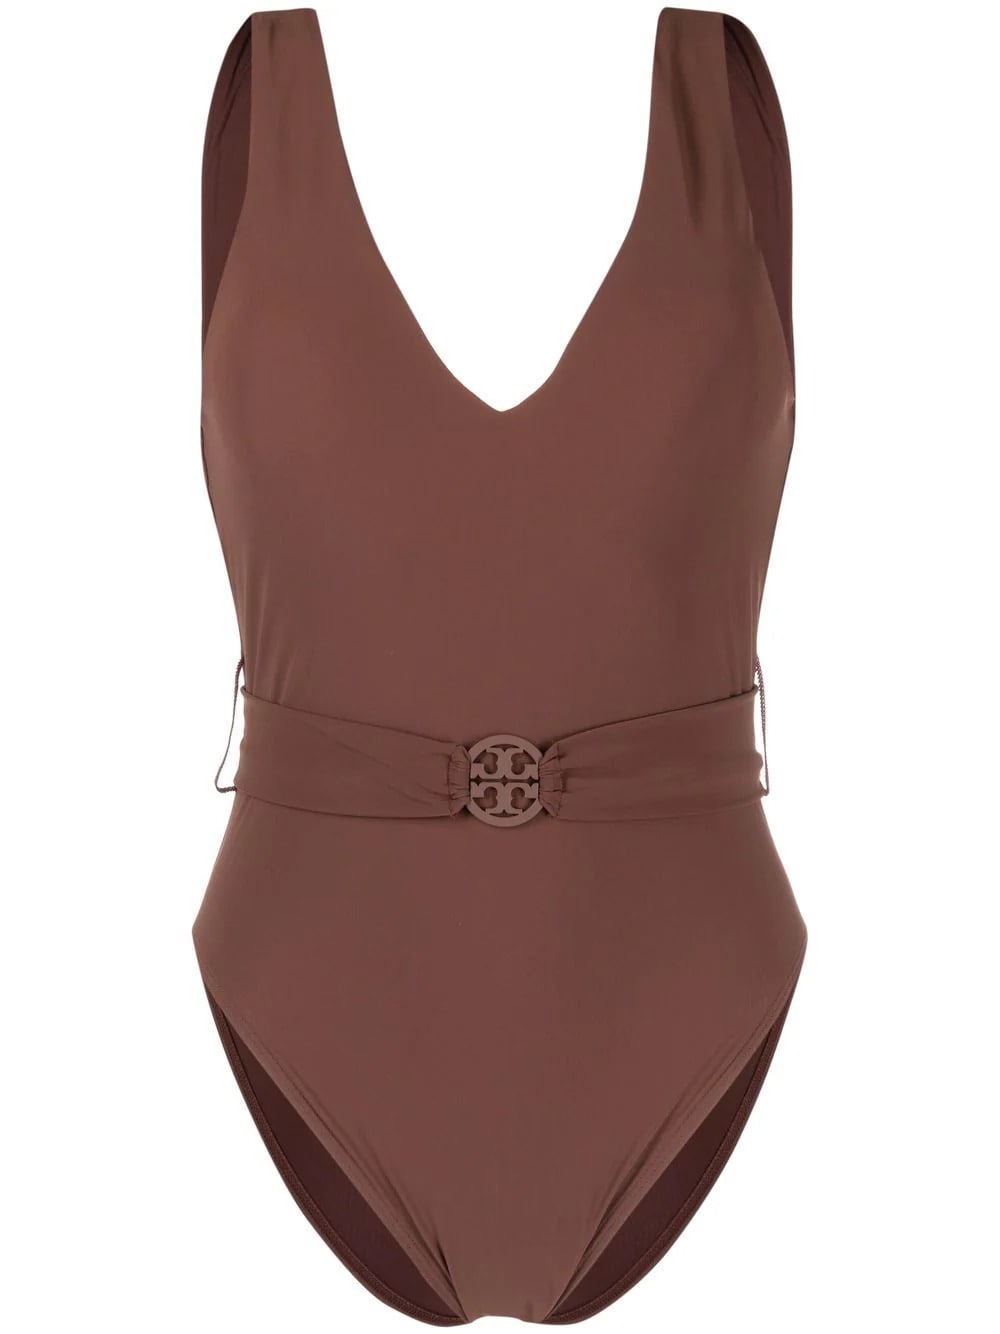 Tory Burch Brown Miller Plunge One-piece Swimsuit